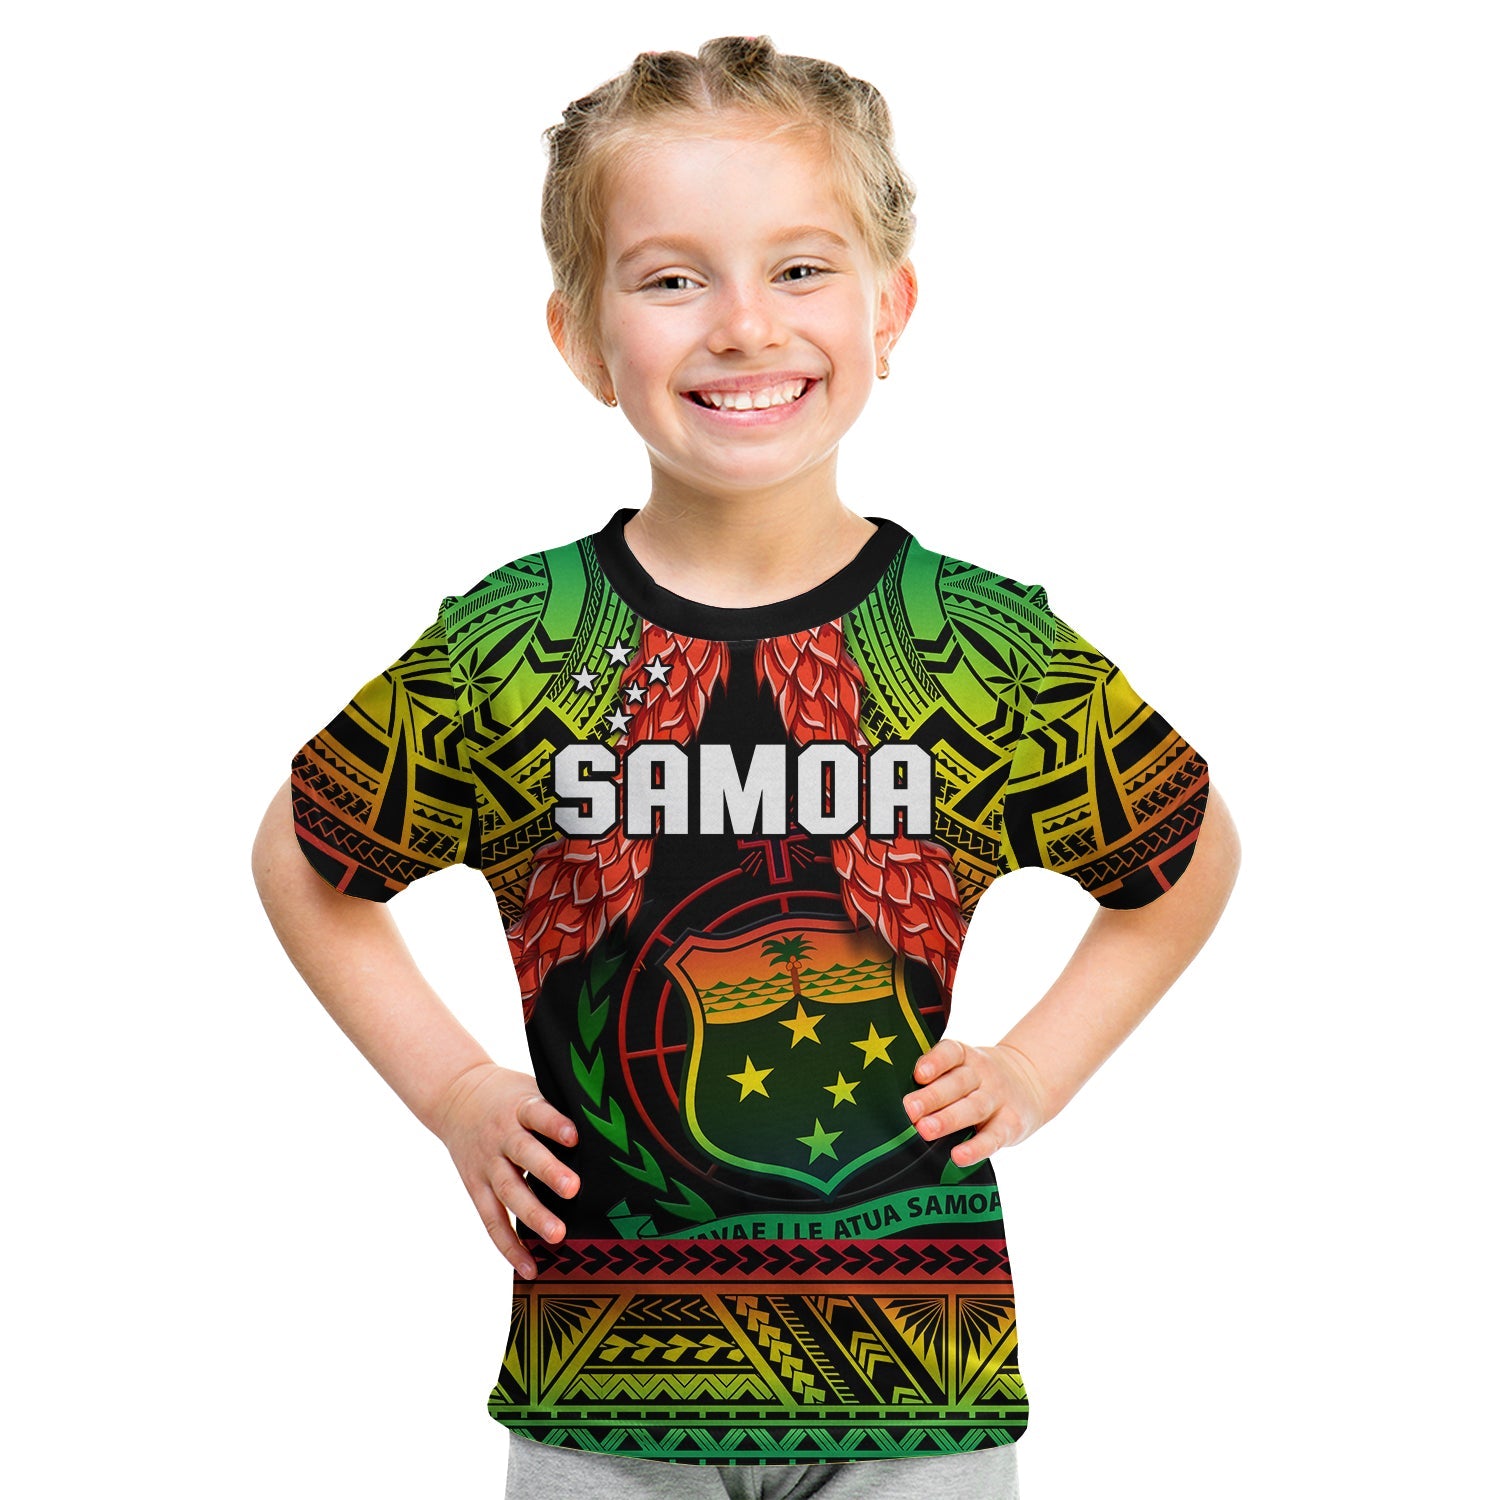 Samoa Rugby T Shirt KID Teuila Torch Ginger Gradient Style LT14 - Polynesian Pride